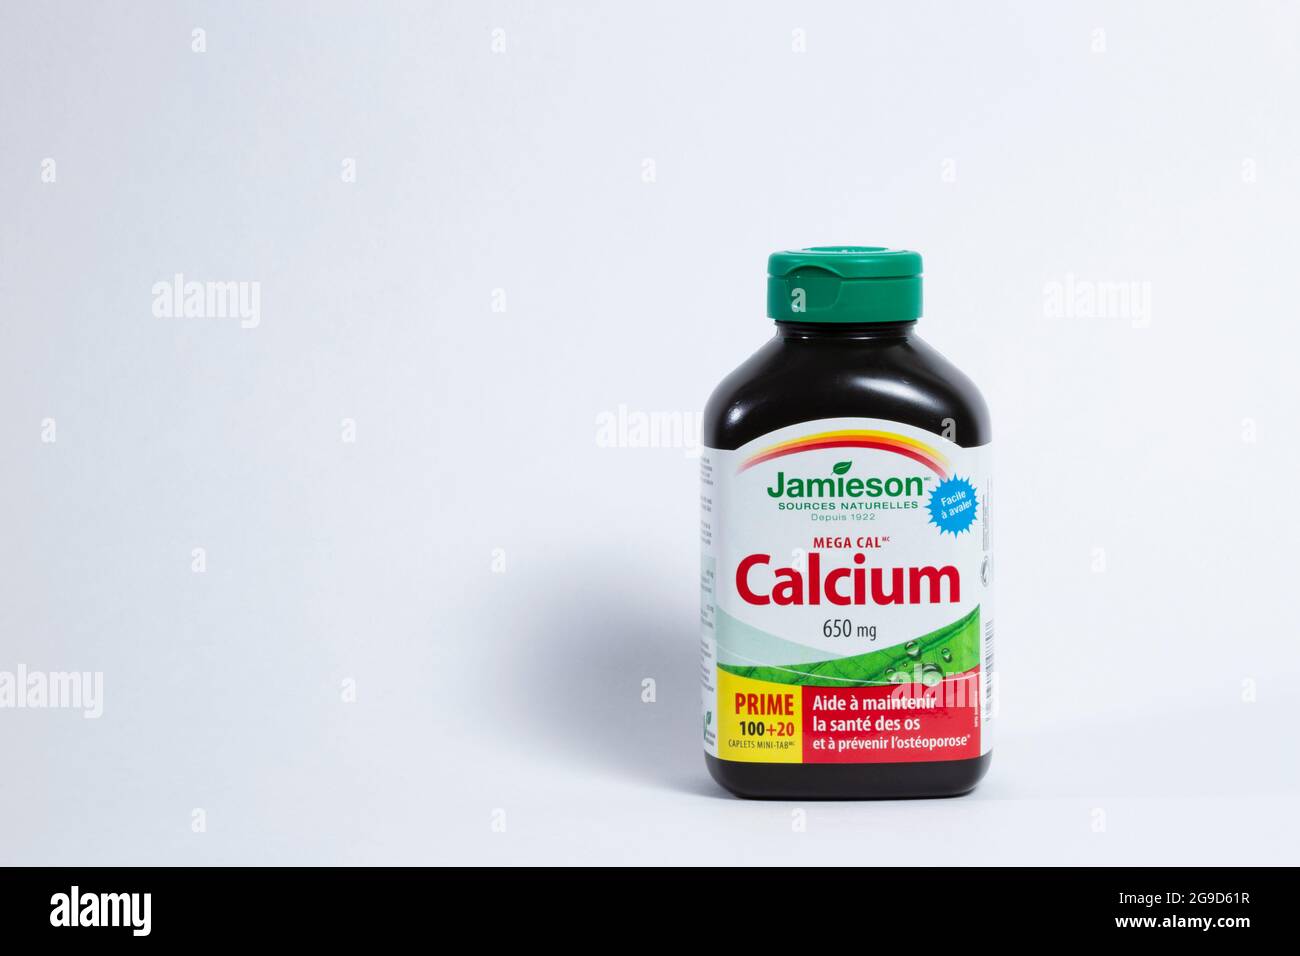 A bottle of Jamieson brand Calcium pills isolated on a white background with copy space. Stock Photo